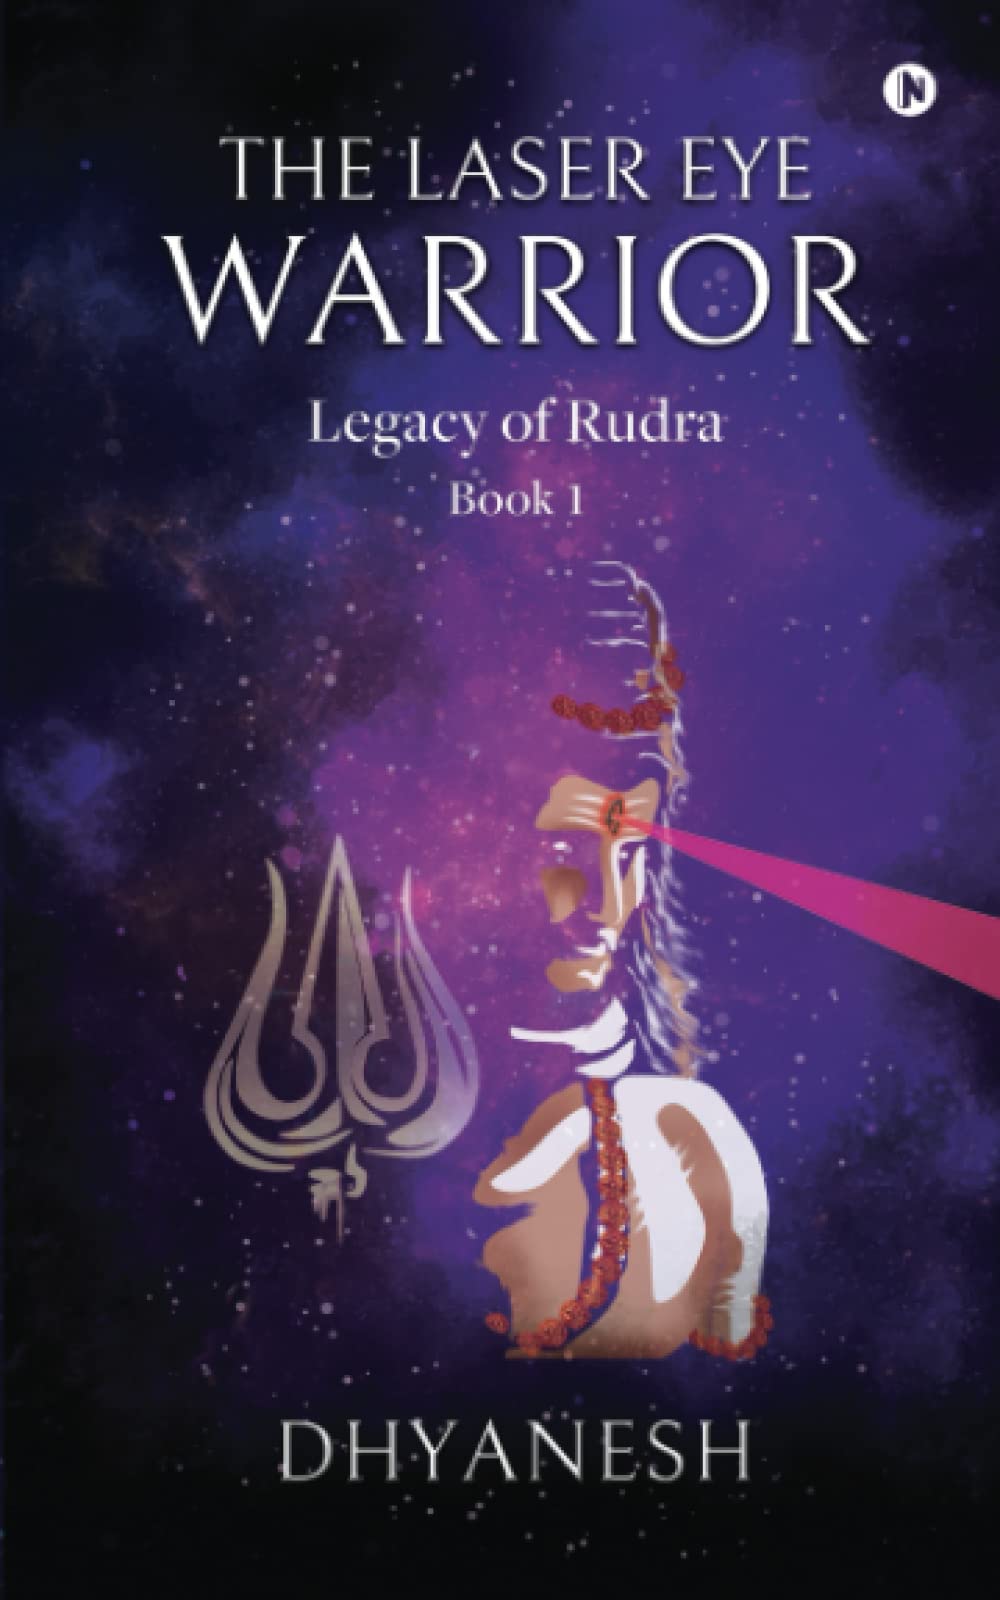 The Laser Eye Warrior: Legacy of Rudra by Dhyanesh